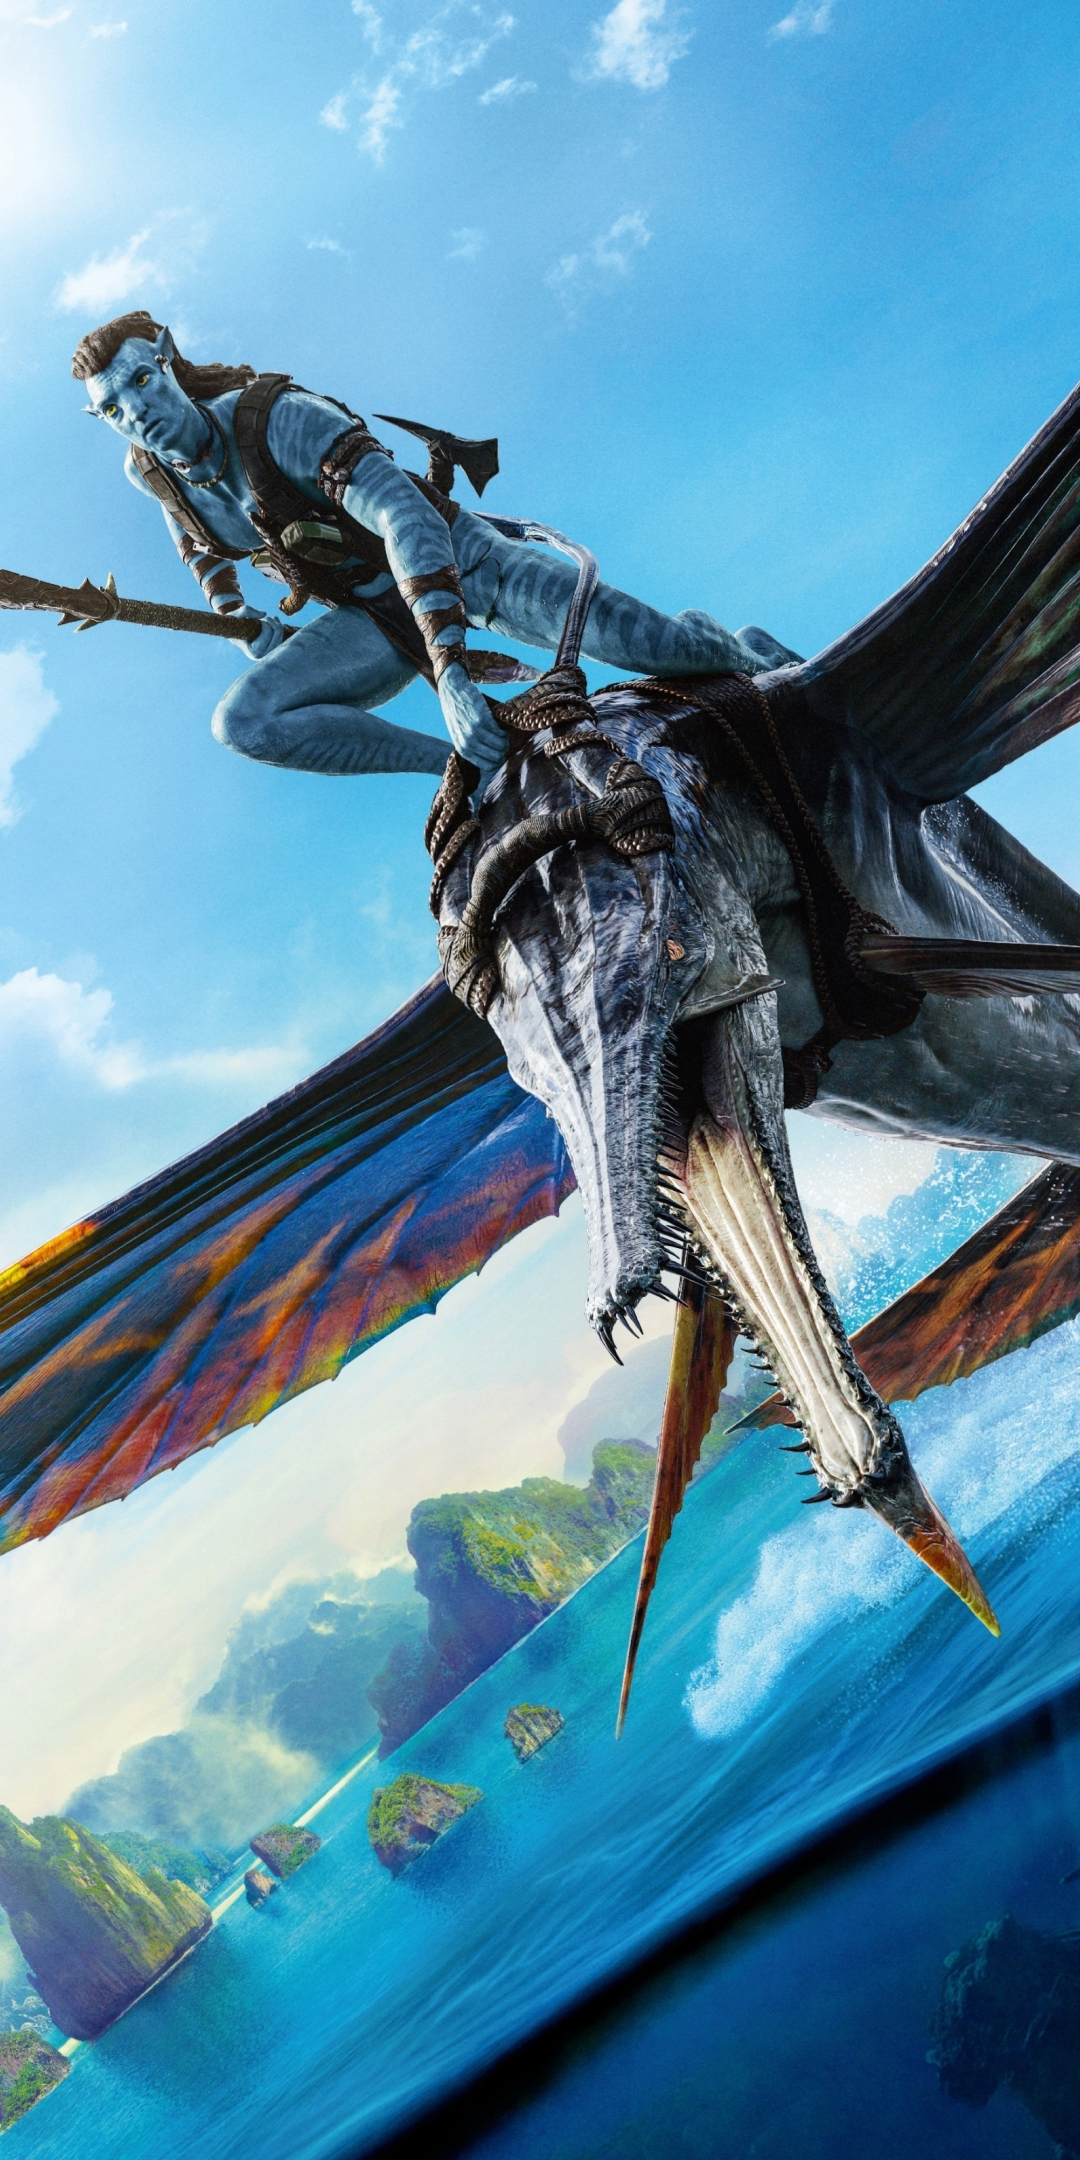 2022, Avatar 2, movie poster, flying creature, 1080x2160 wallpaper